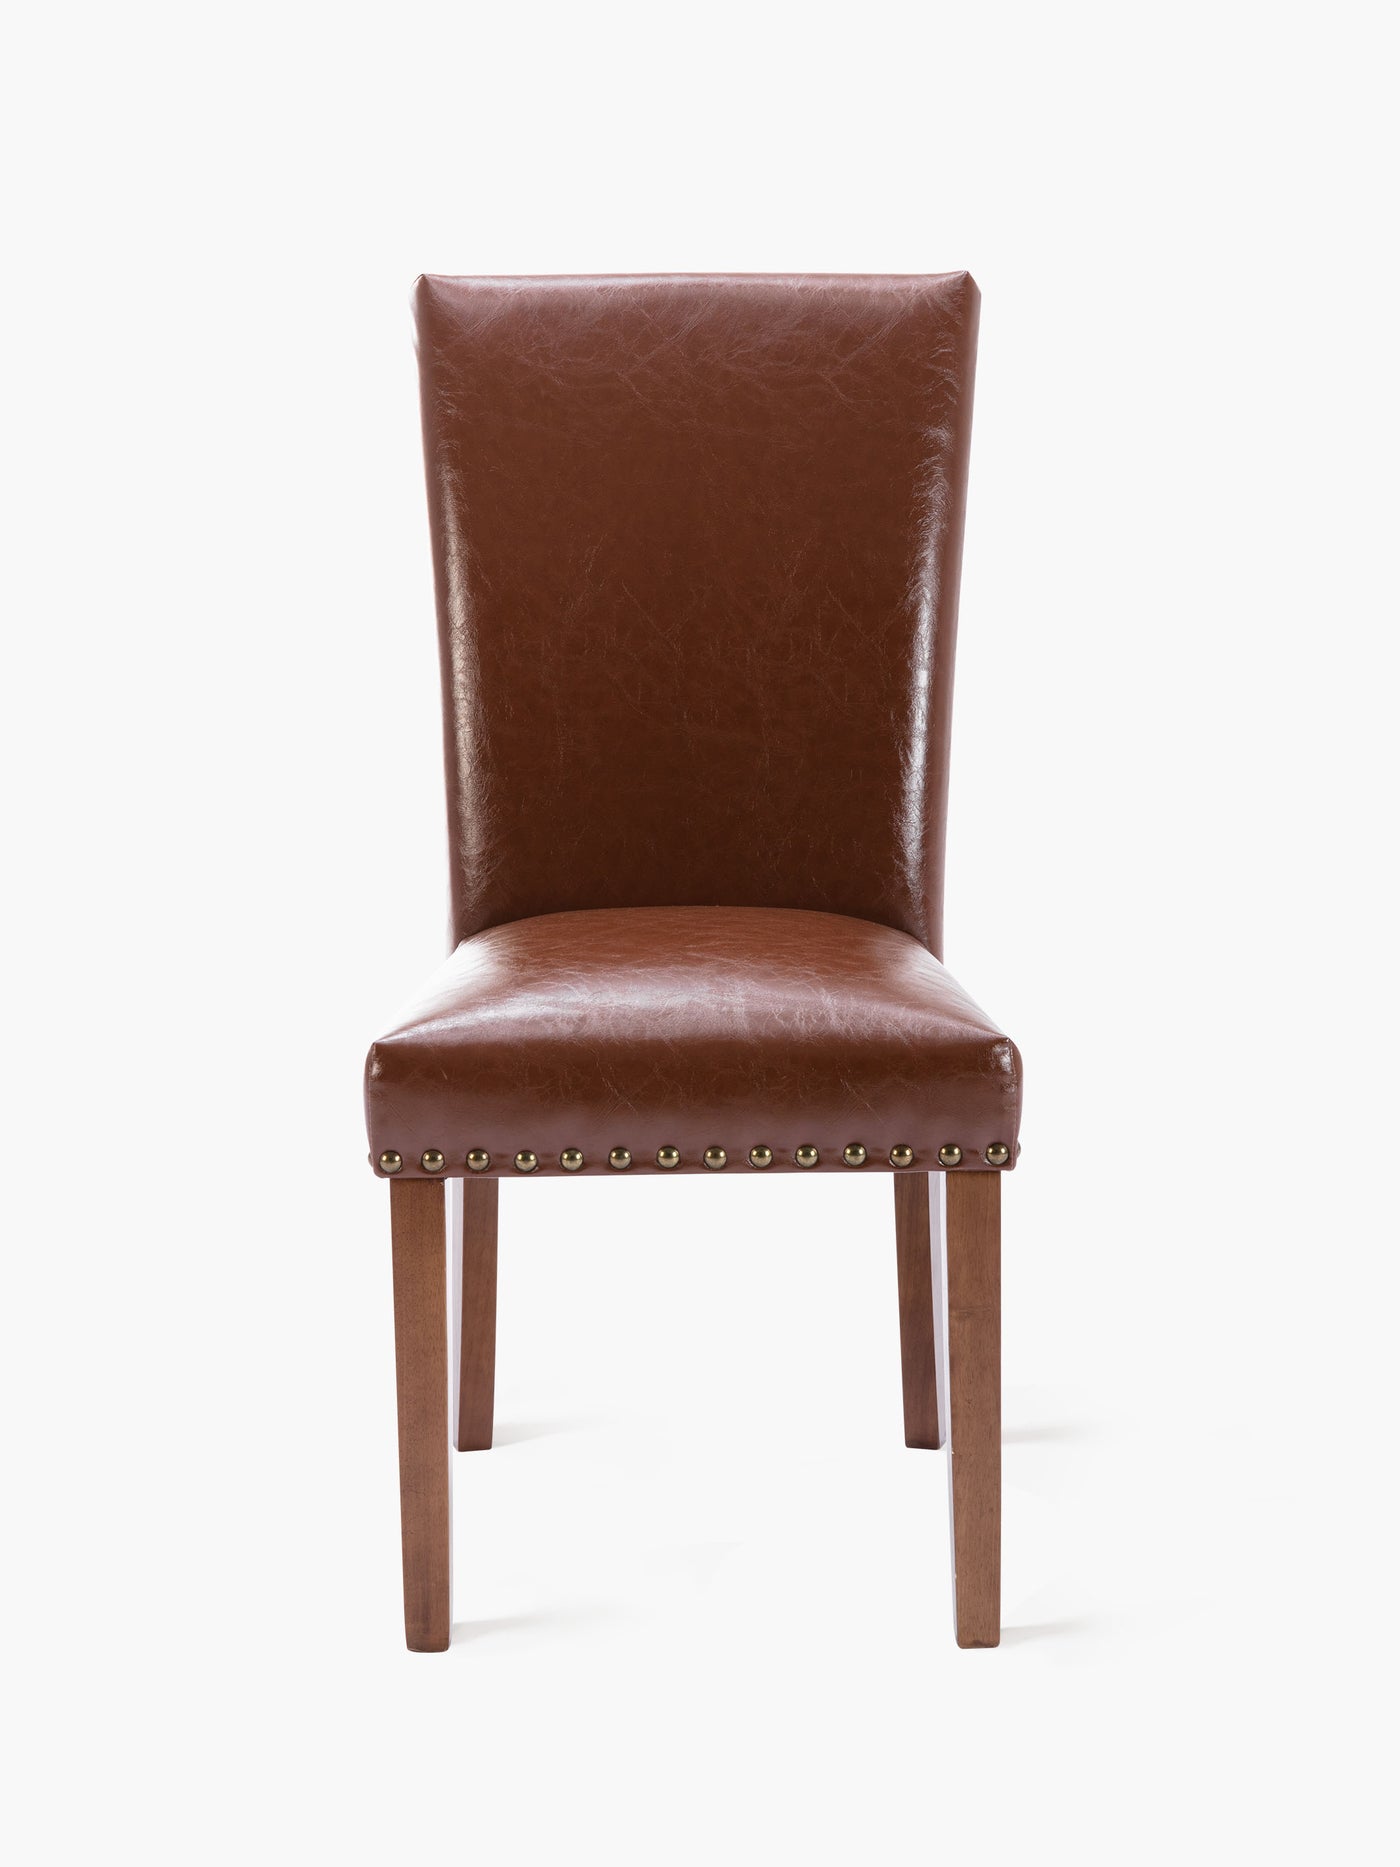 COLAMY Tufted Dining Chair CL420 Light Brown #color_lightbrown